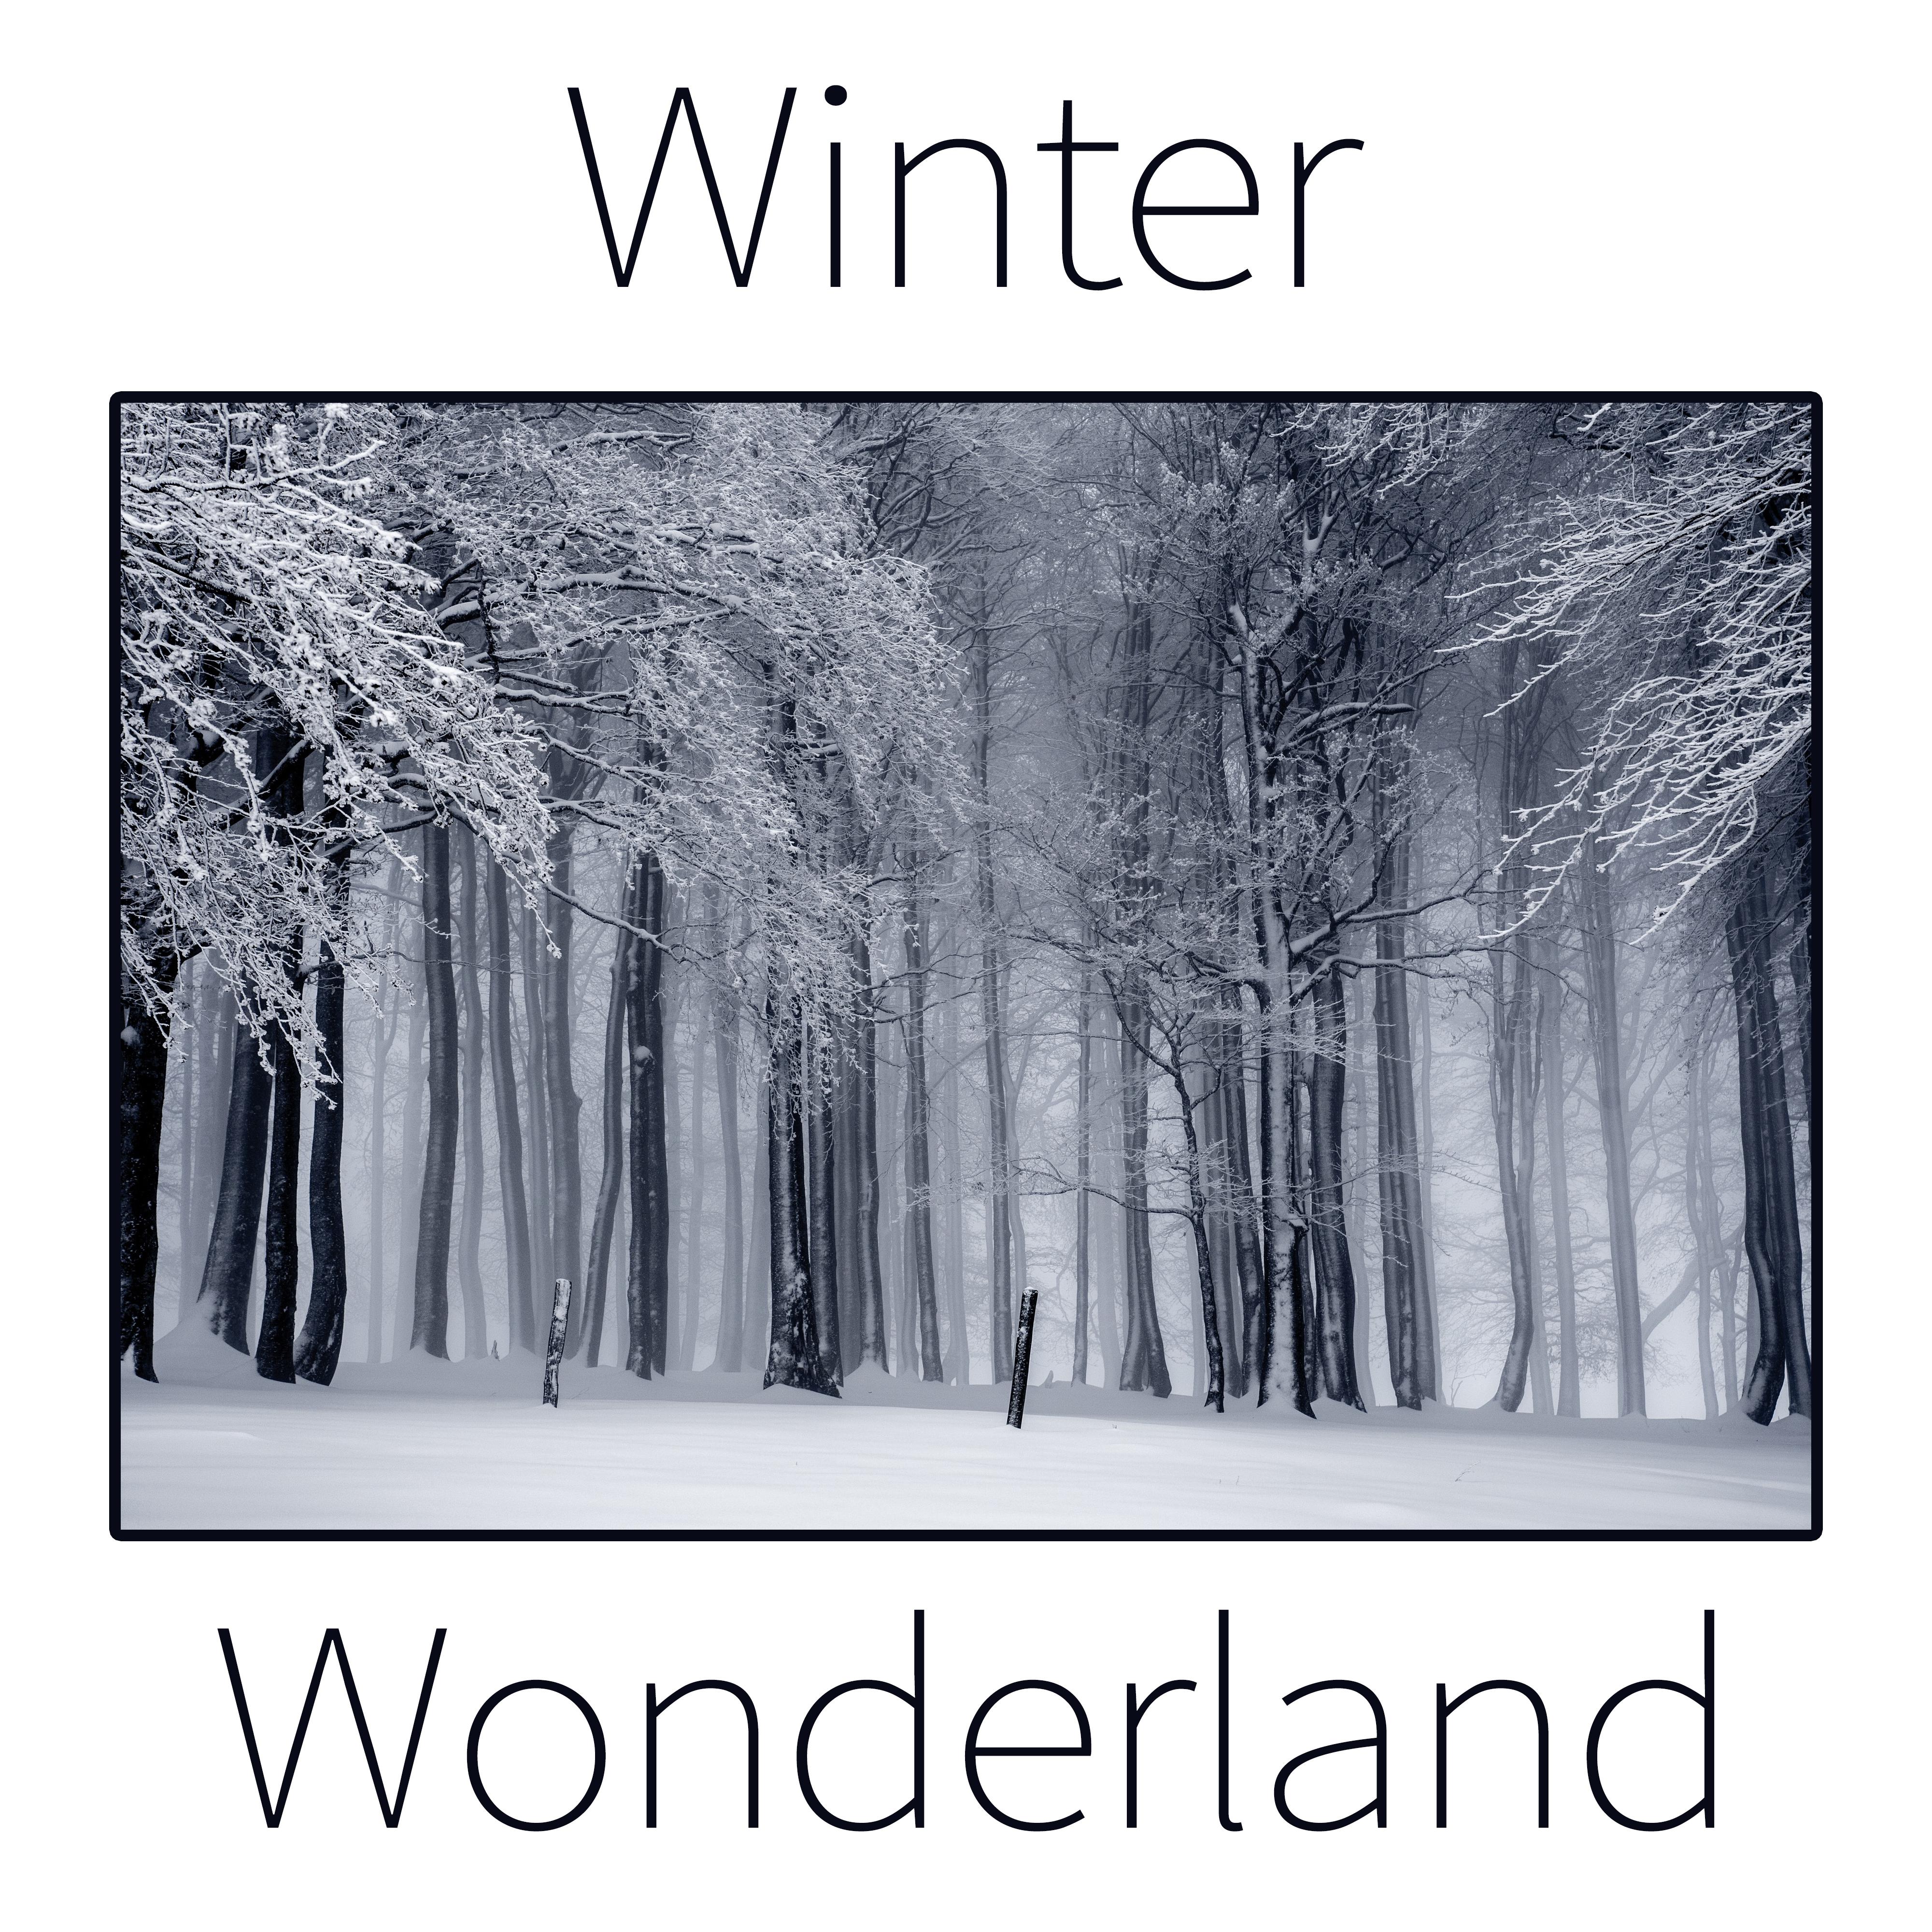 Winter Wonderland – Instrumental, Christmas Music, Traditional Carols, Christmas Songs, White Holiday with Family, Magical Atmosphere